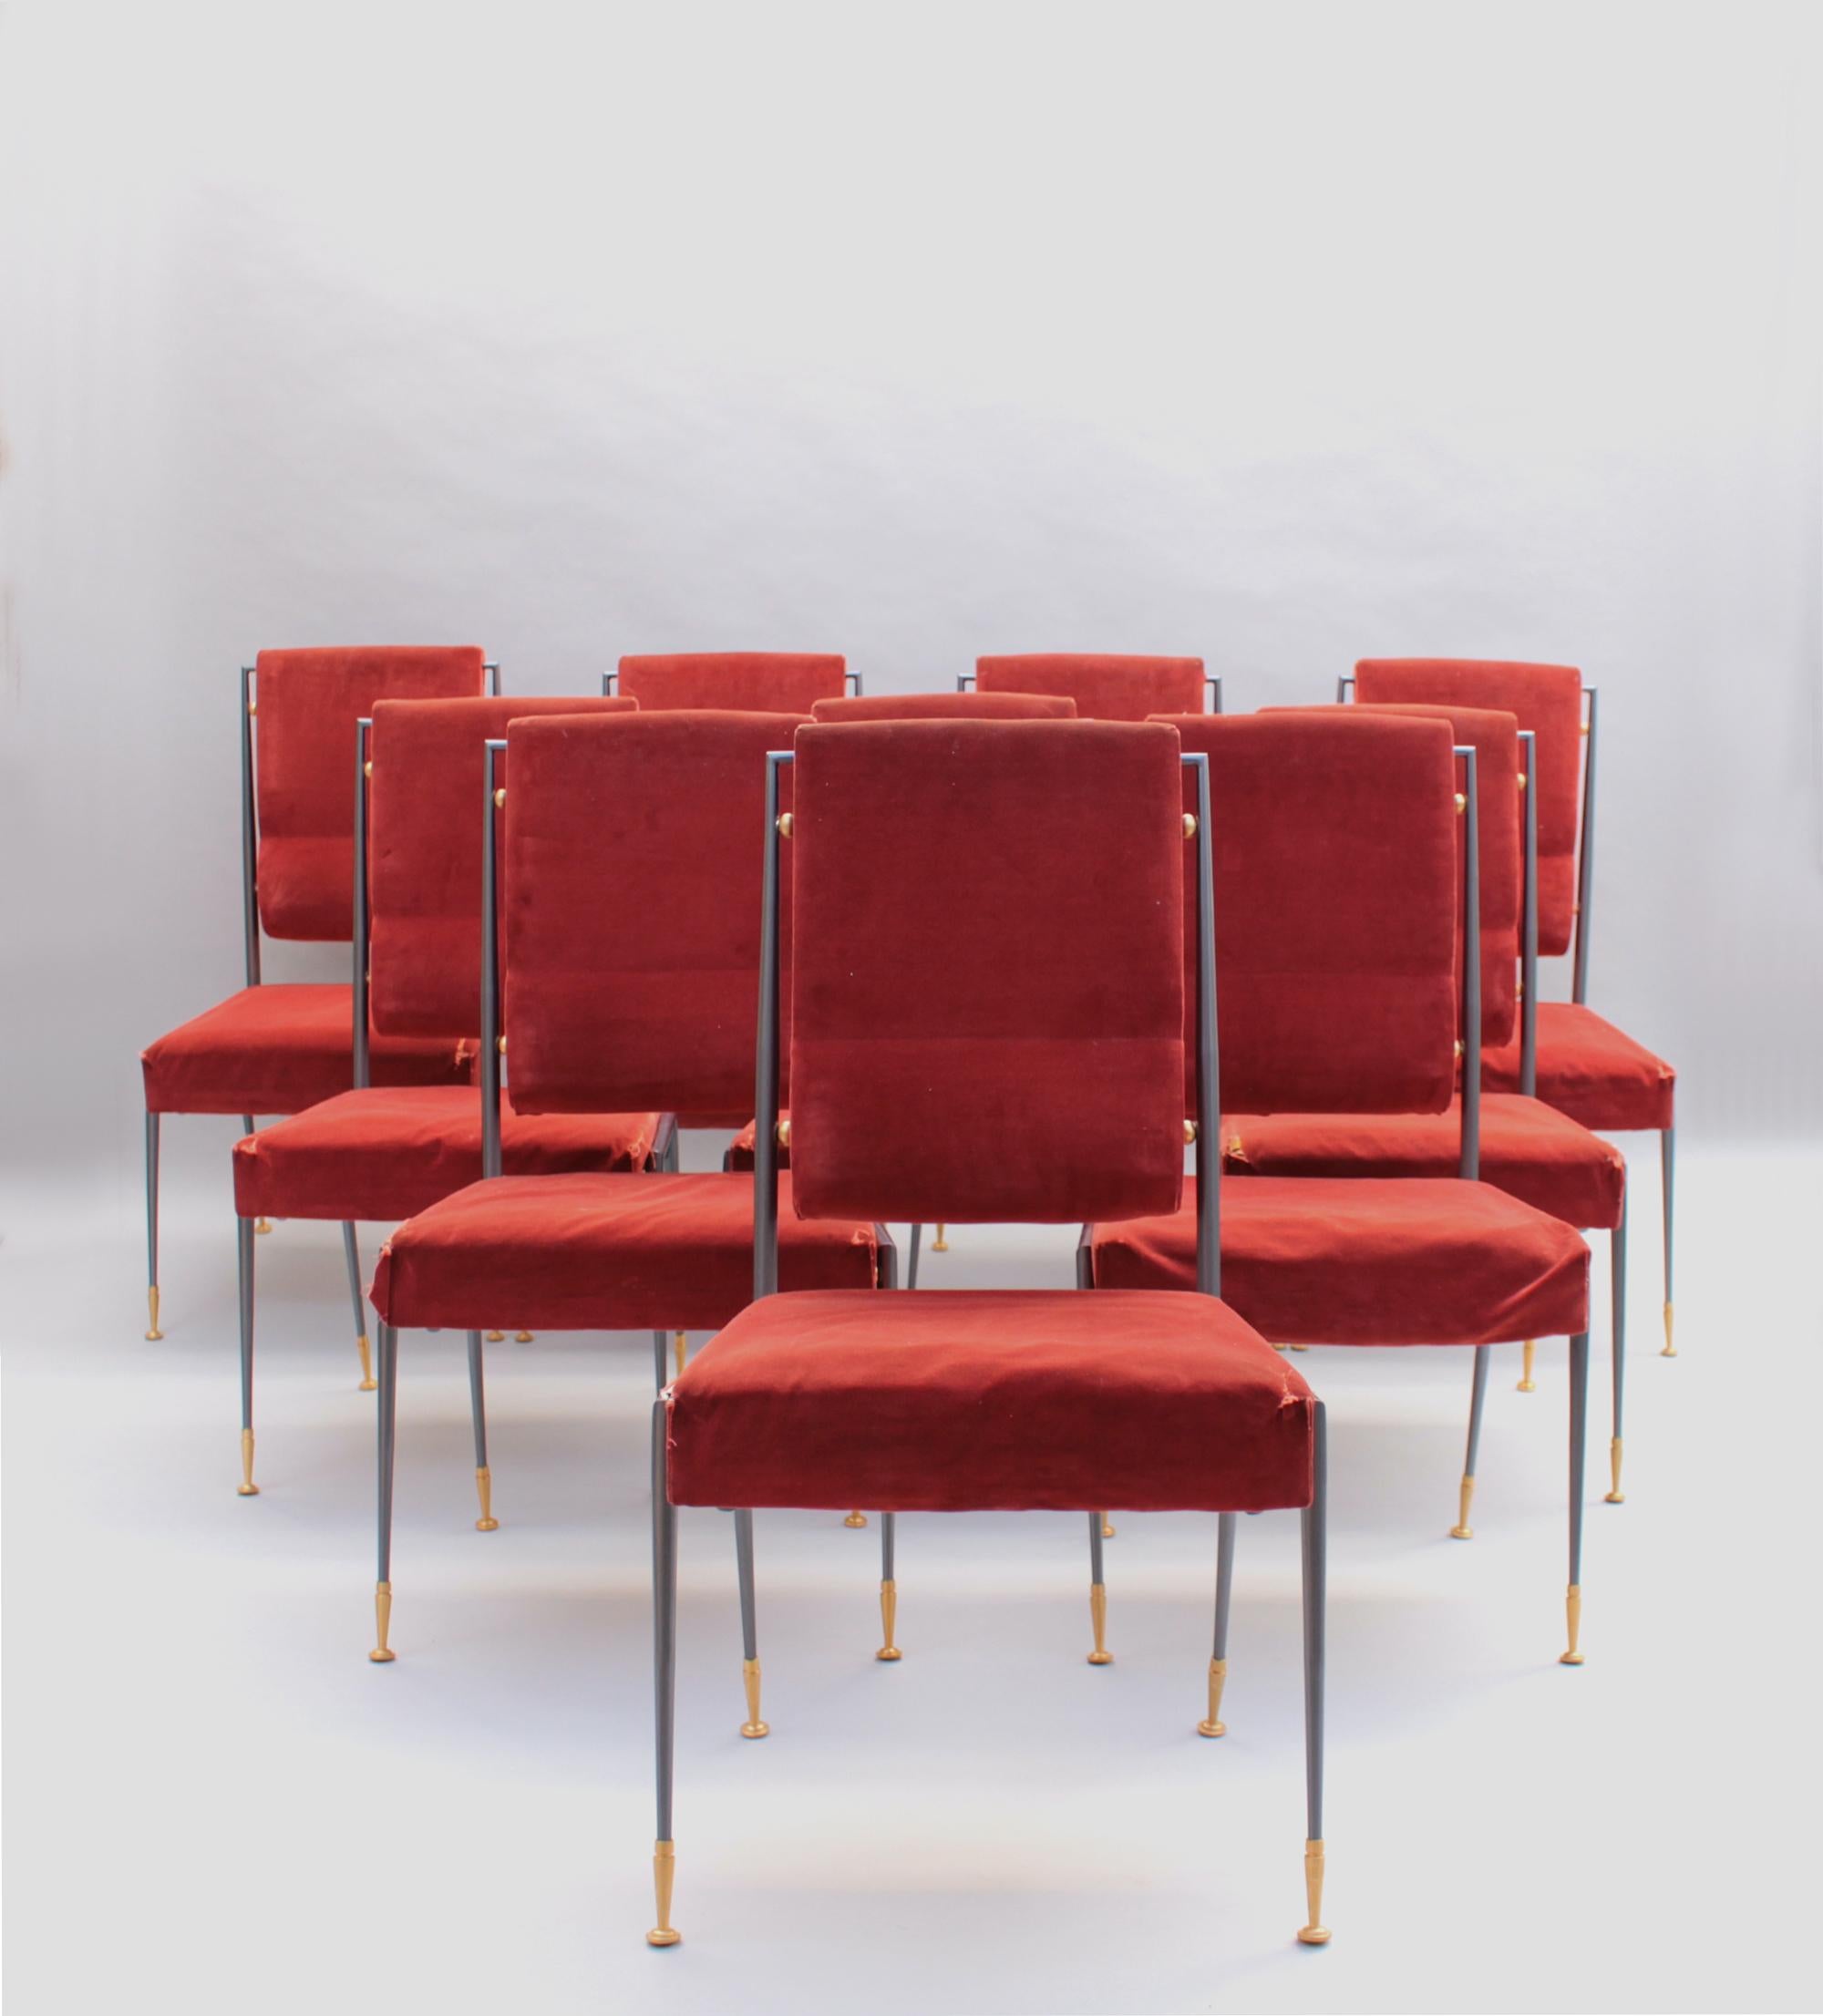 Jules Leleu (1883 - 1961)-  Rare set of 10 fine French Mid-Century dining chairs with a tubular lacquered metal frame and gilded brass feet.
Signed 